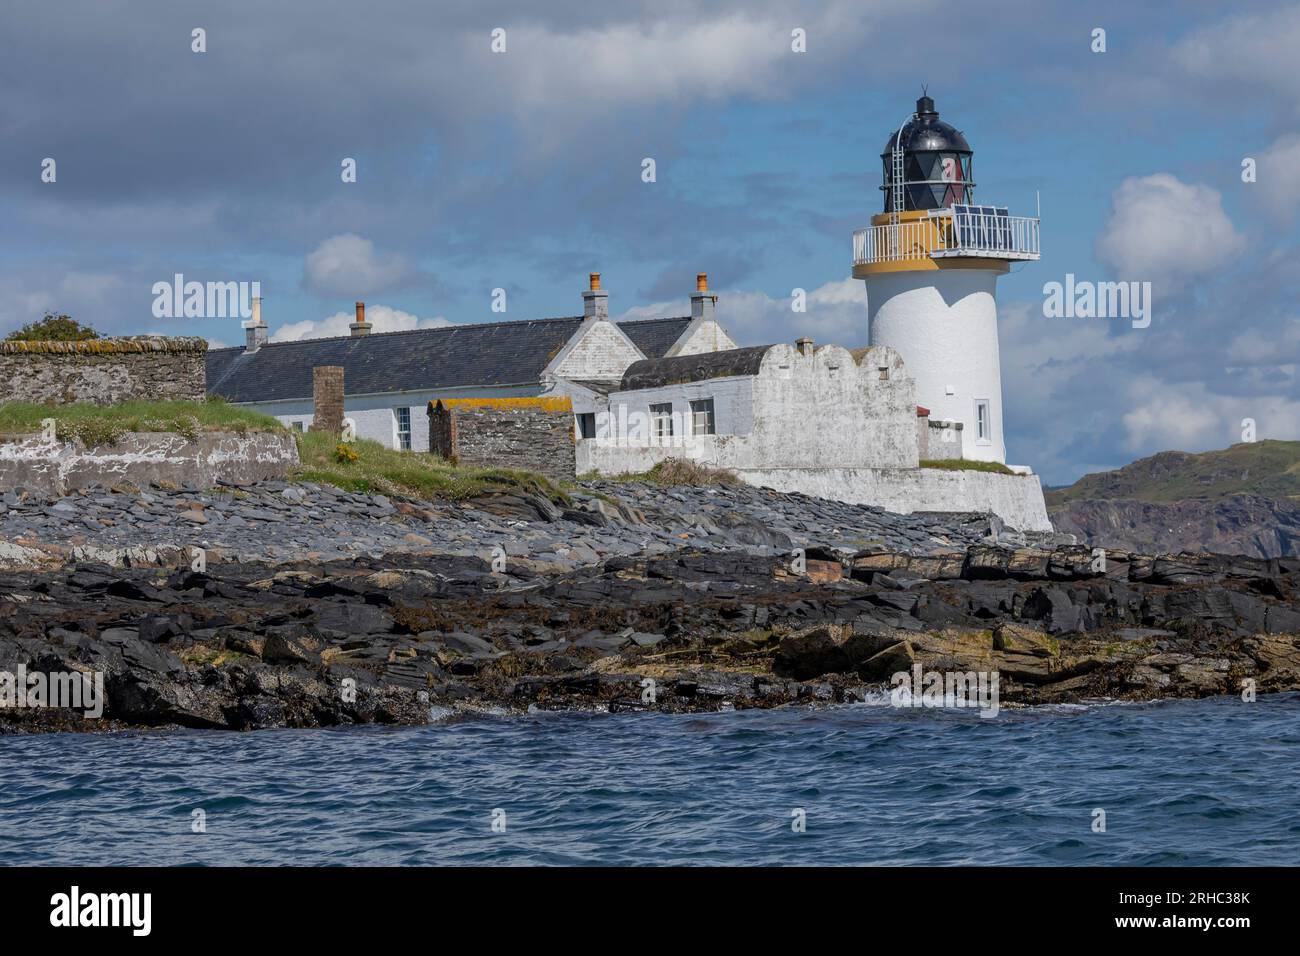 Lighthouse and its surrounding buildings on a scottish island Stock Photo